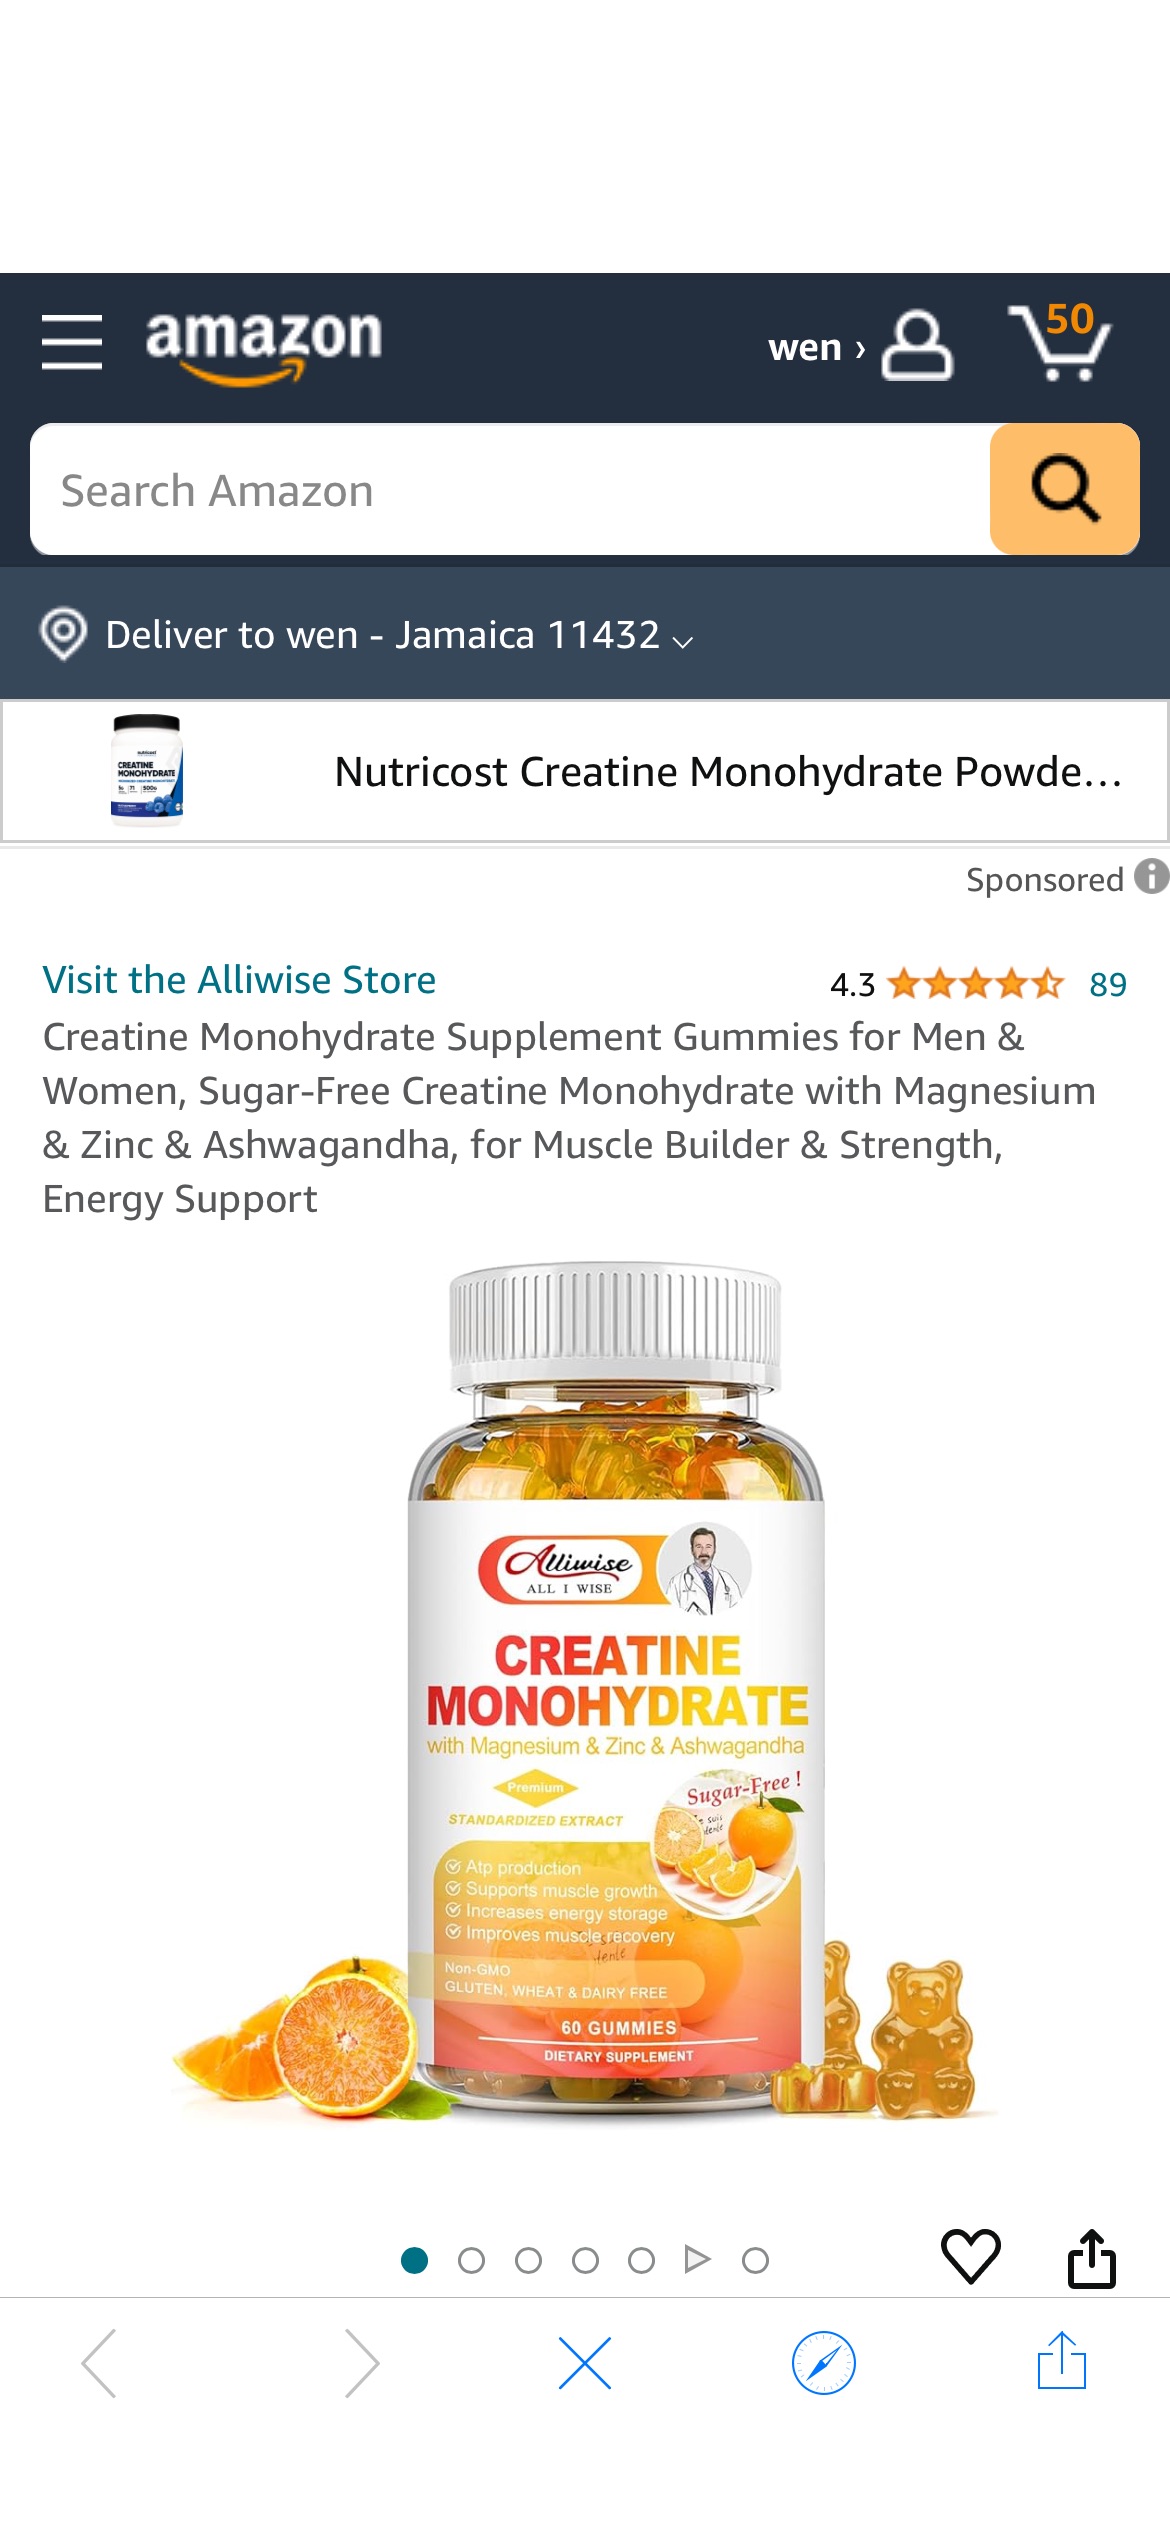 Amazon.com: Alliwise Creatine Monohydrate Supplement Gummies for Men & Women, Sugar-Free Creatine Monohydrate with Magnesium & Zinc & Ashwagandha, for Muscle Builder & Strength, Energy Support : Healt